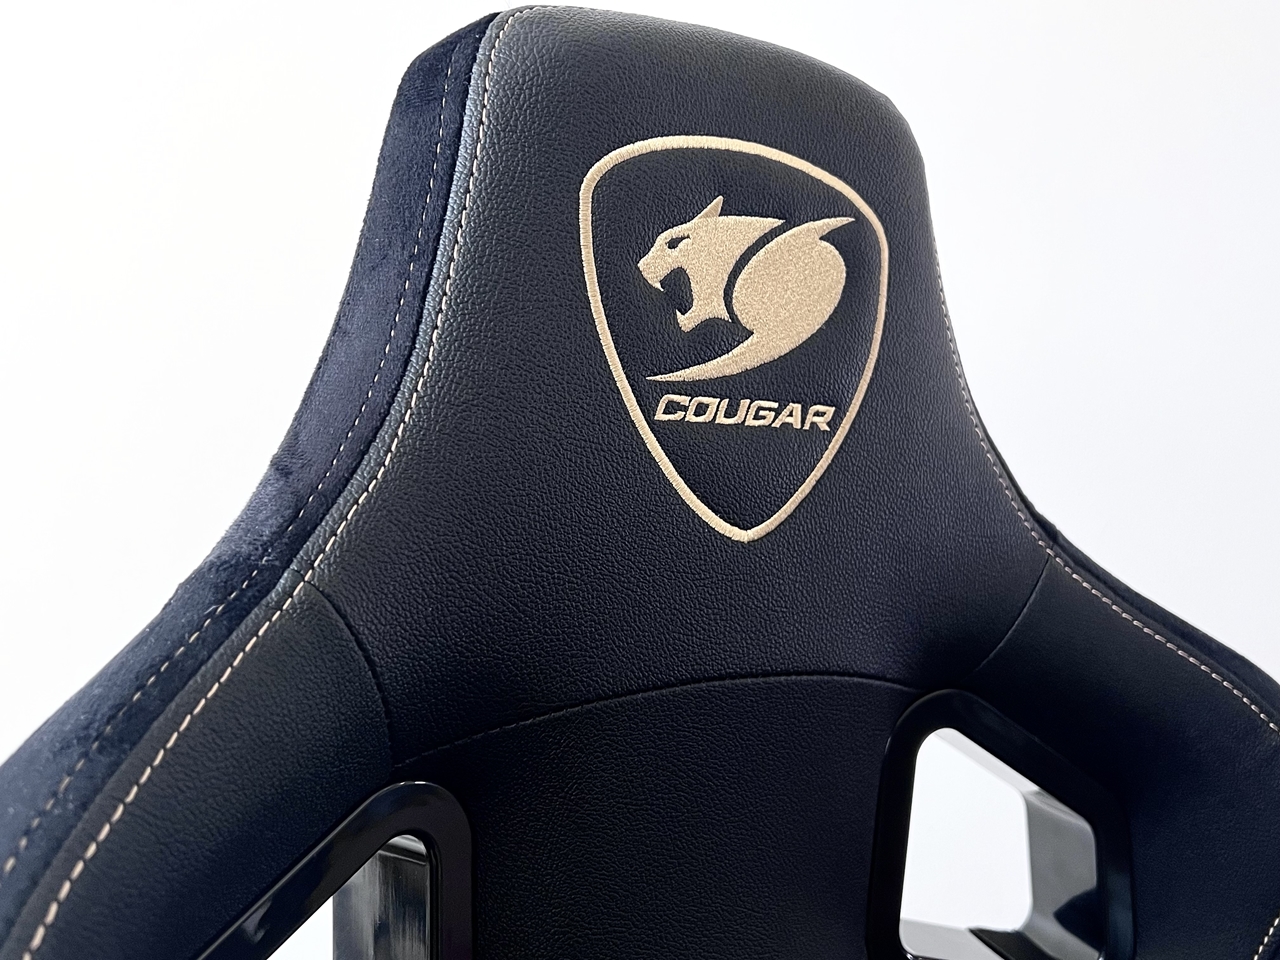 A Premium Gaming Chair fit for a King - Cougar Armor S Royal 